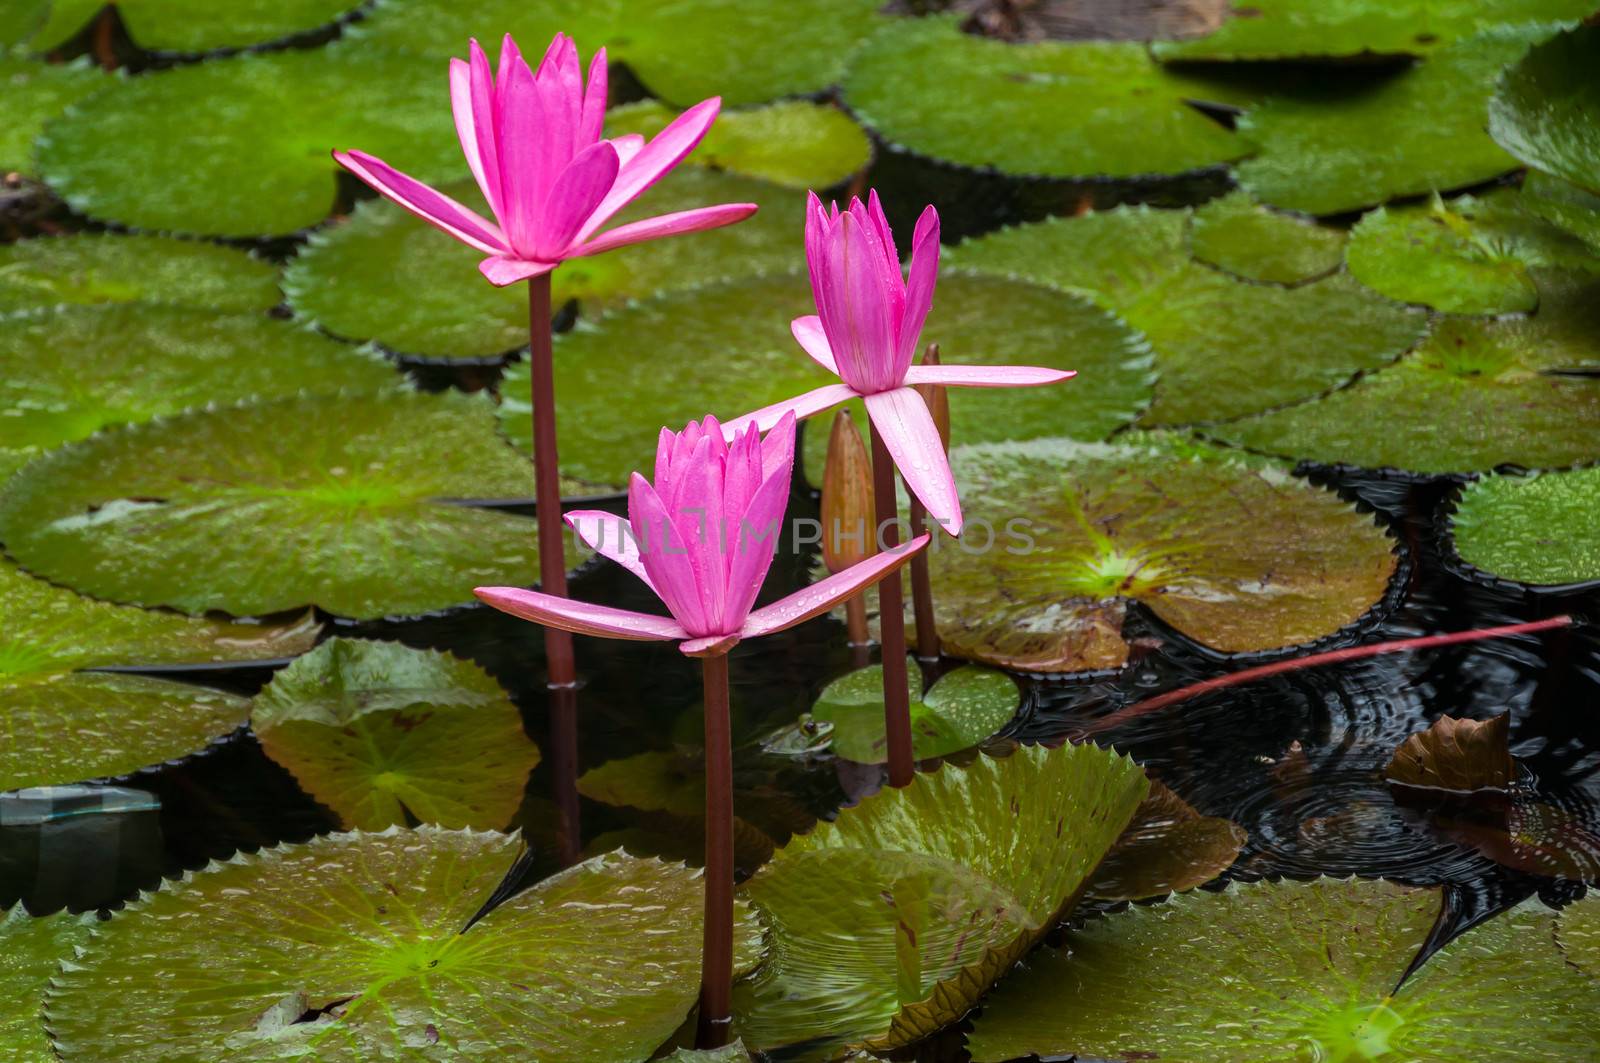 Water Lilly in the pond among the leaves.